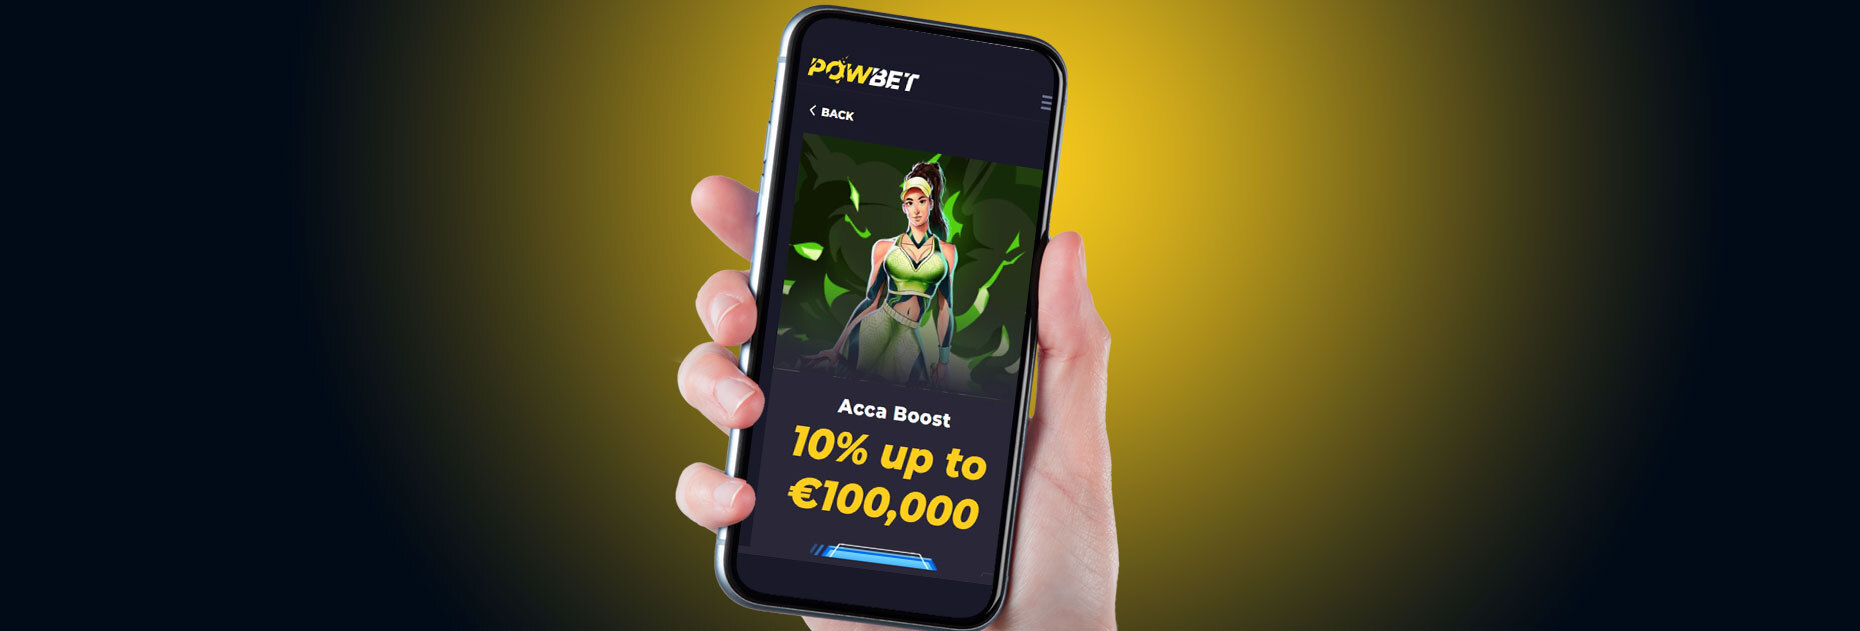 Powbet - Overview & Rating: rules, support, sign up, free bets, site